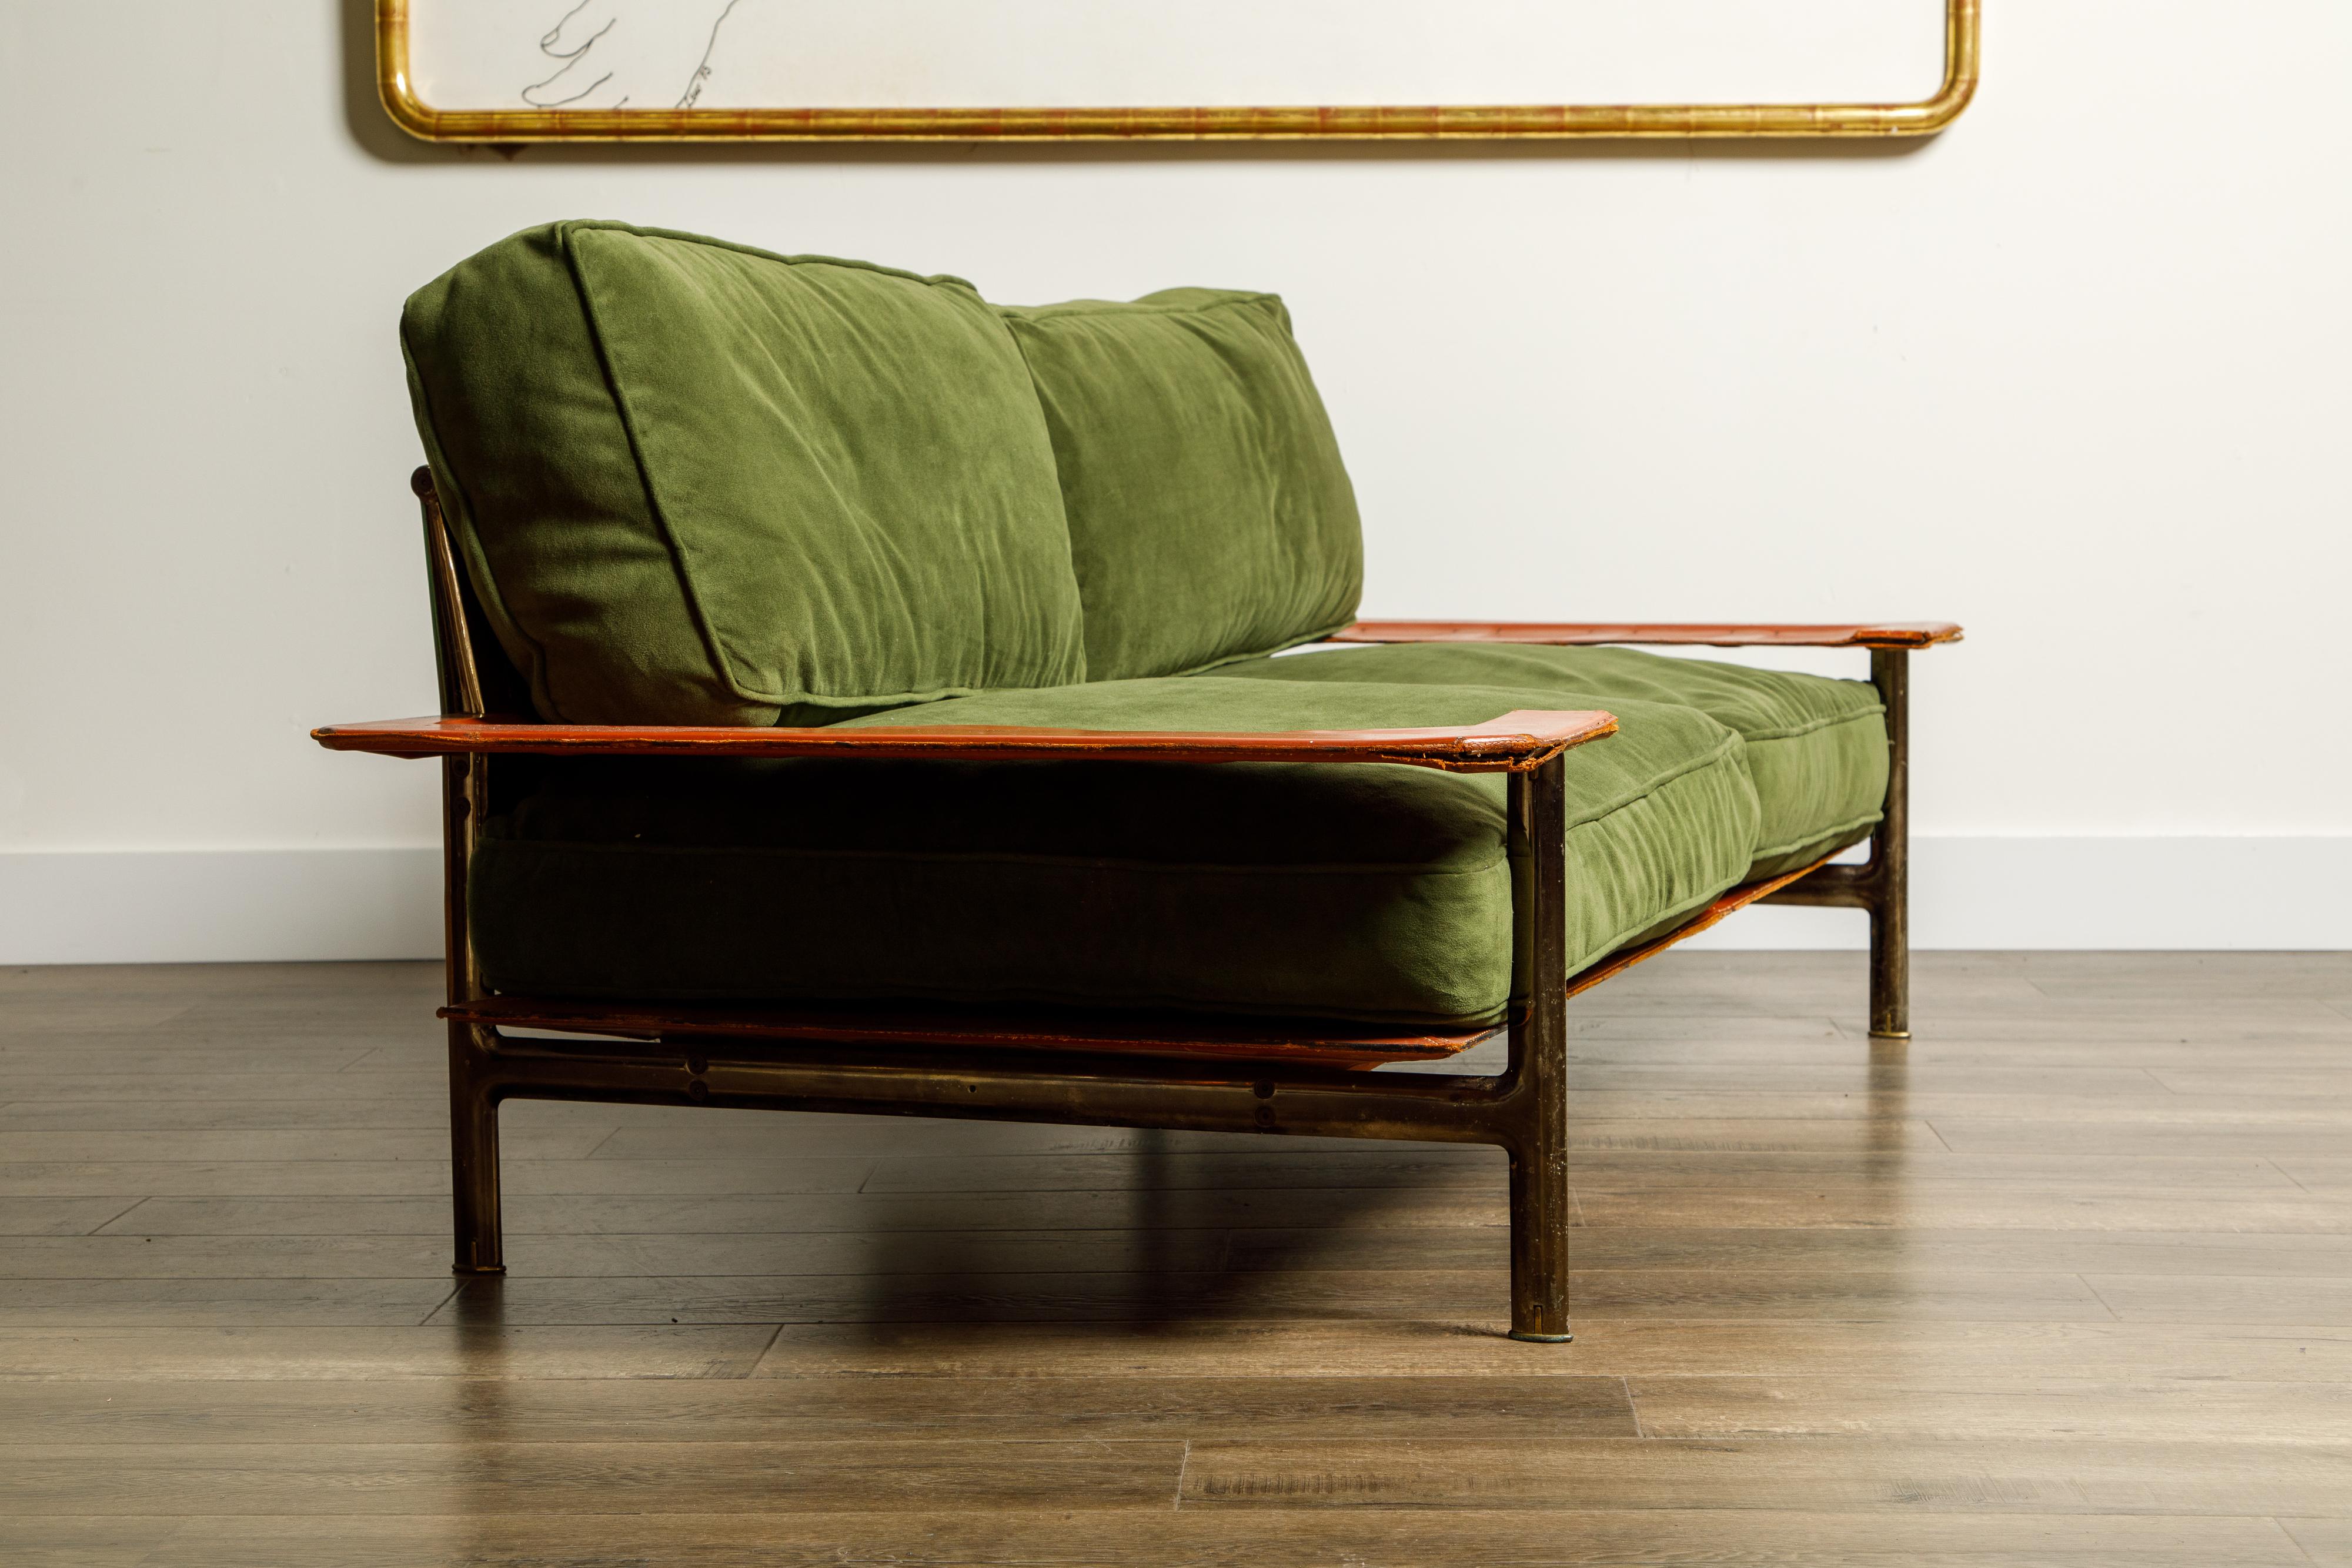 Modern Early 'Diesis' Loveseat Sofas by Paolo Nava for B&B Italia, c 1979 Italy, Signed